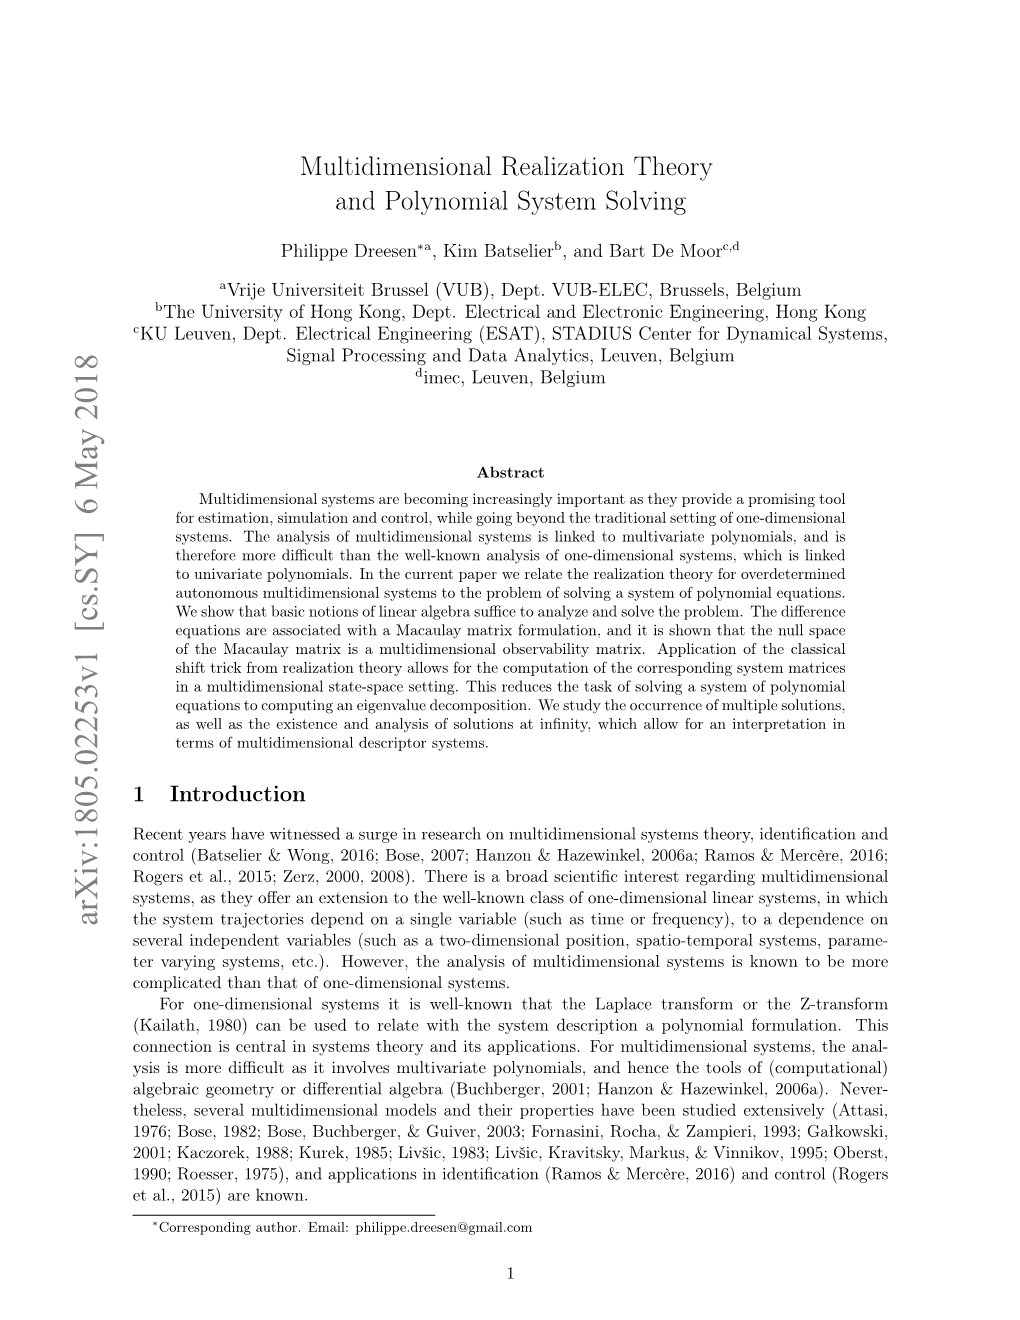 Multidimensional Realization Theory and Polynomial System Solving